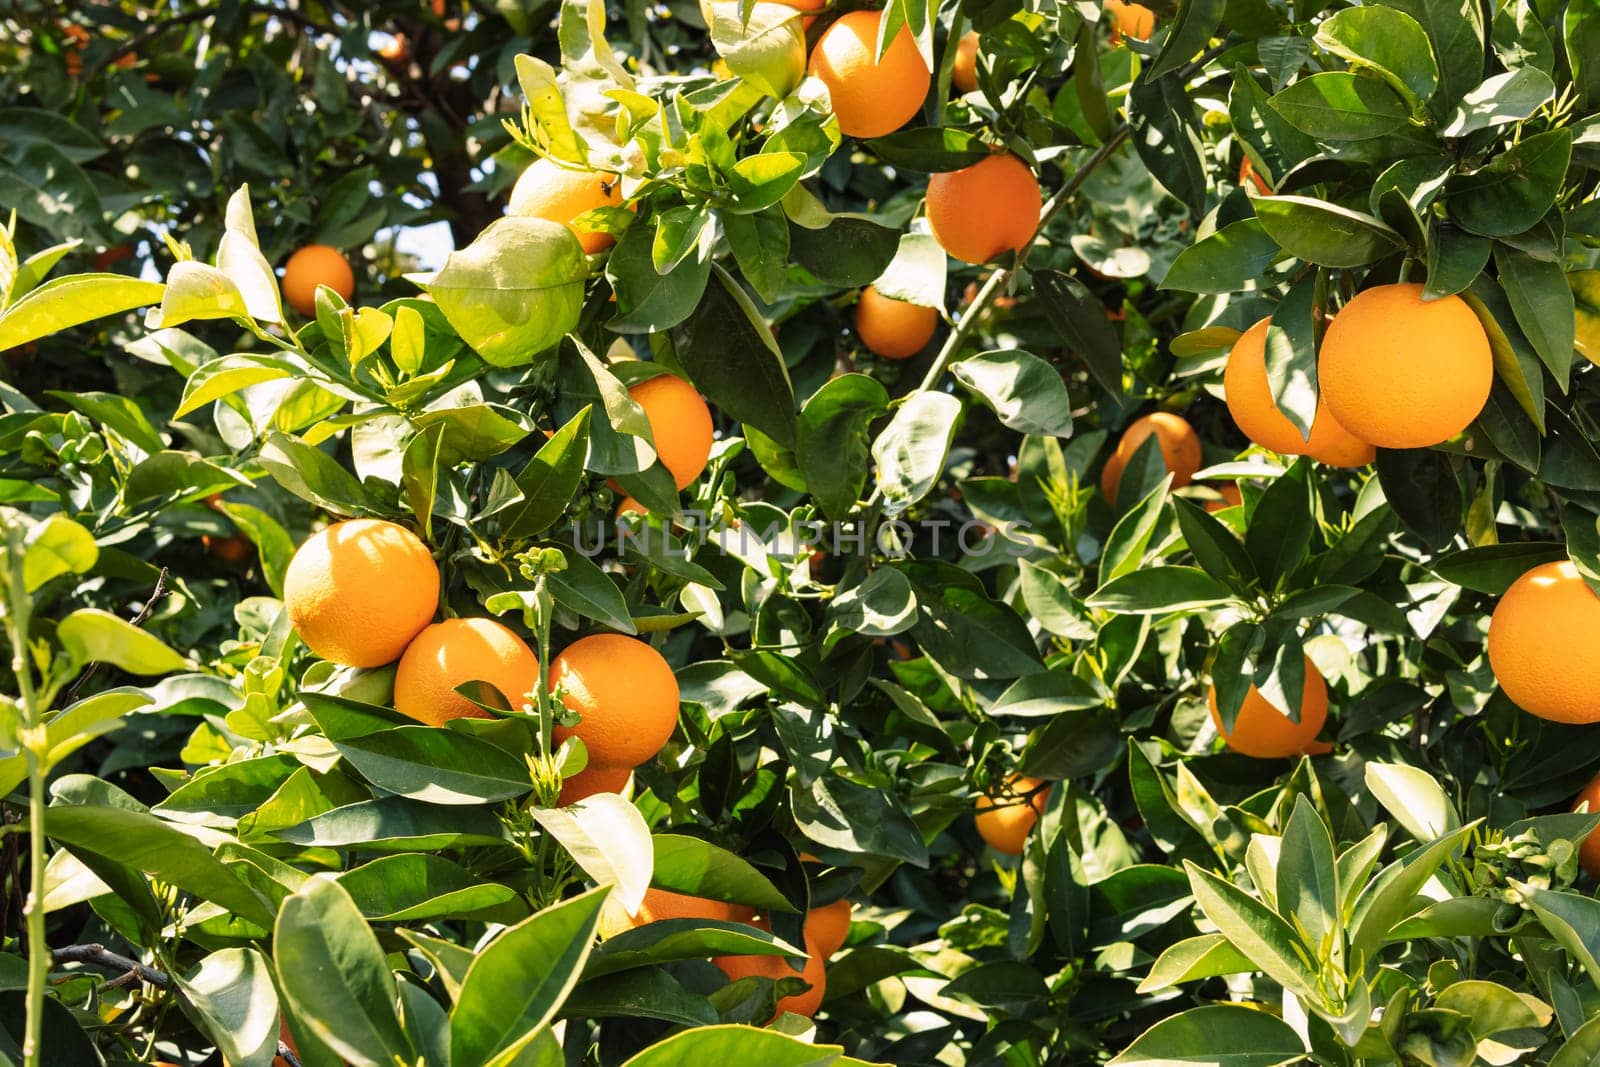 Orange tree with fruits.Many ripe beautiful oranges on a branch with green leaves High quality photo